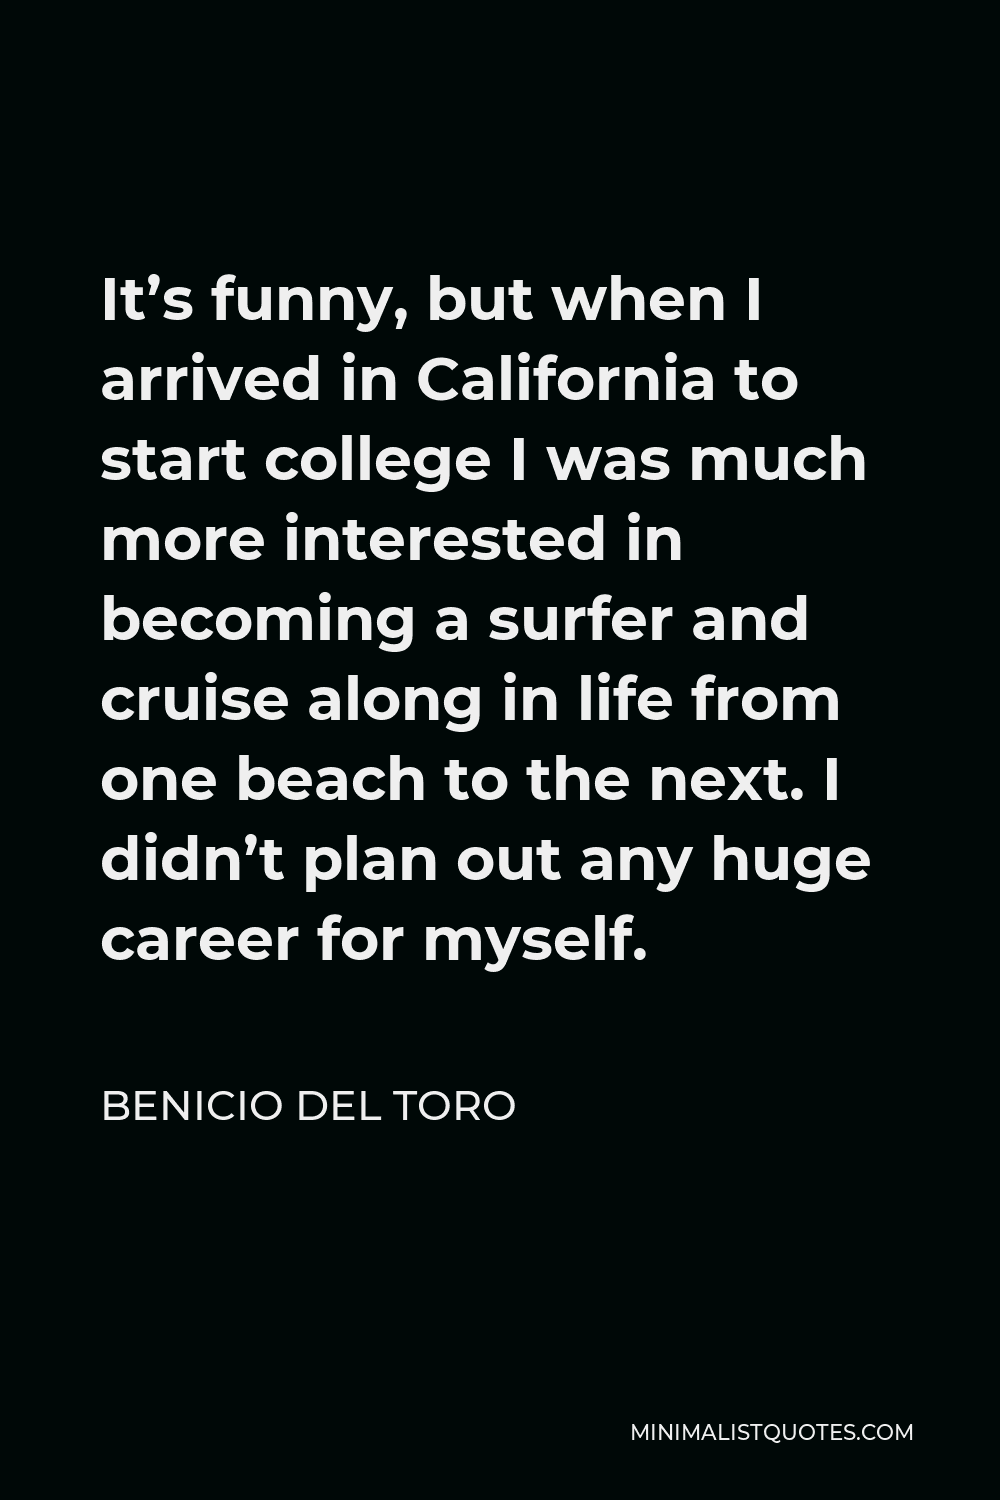 Benicio Del Toro Quote - It’s funny, but when I arrived in California to start college I was much more interested in becoming a surfer and cruise along in life from one beach to the next. I didn’t plan out any huge career for myself.